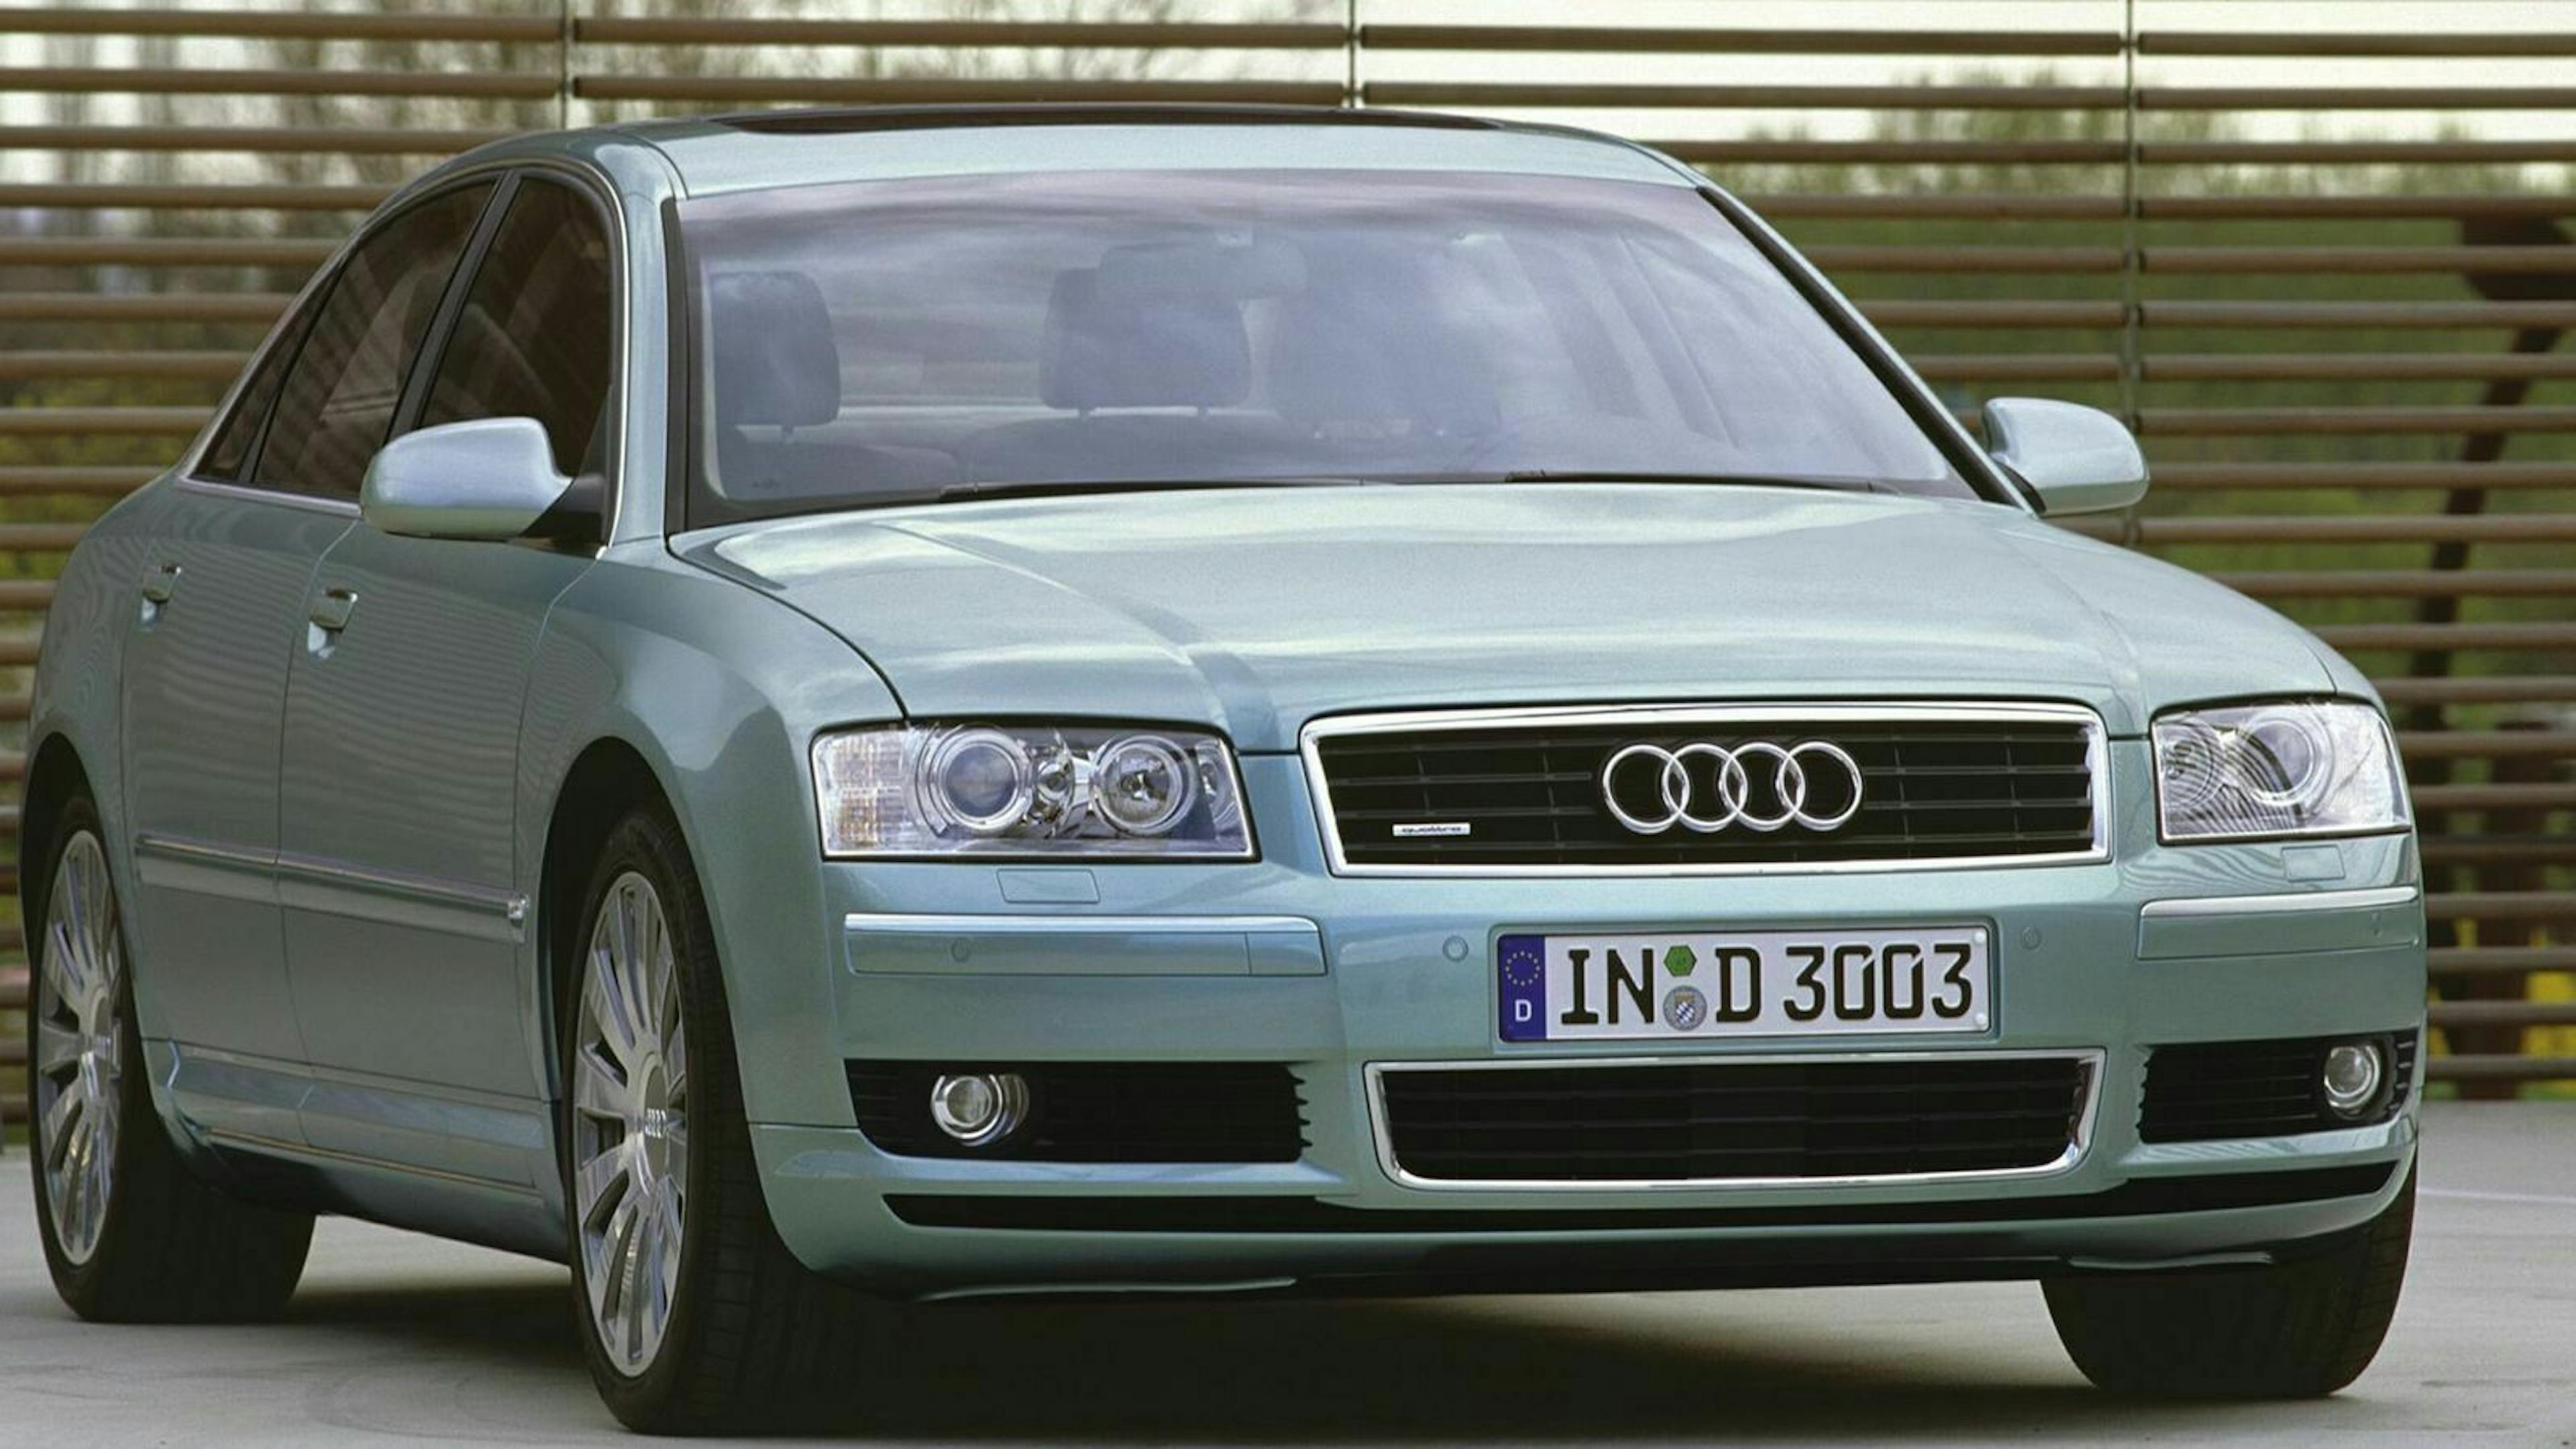 Audi A8 D3 stehend in Frontansicht